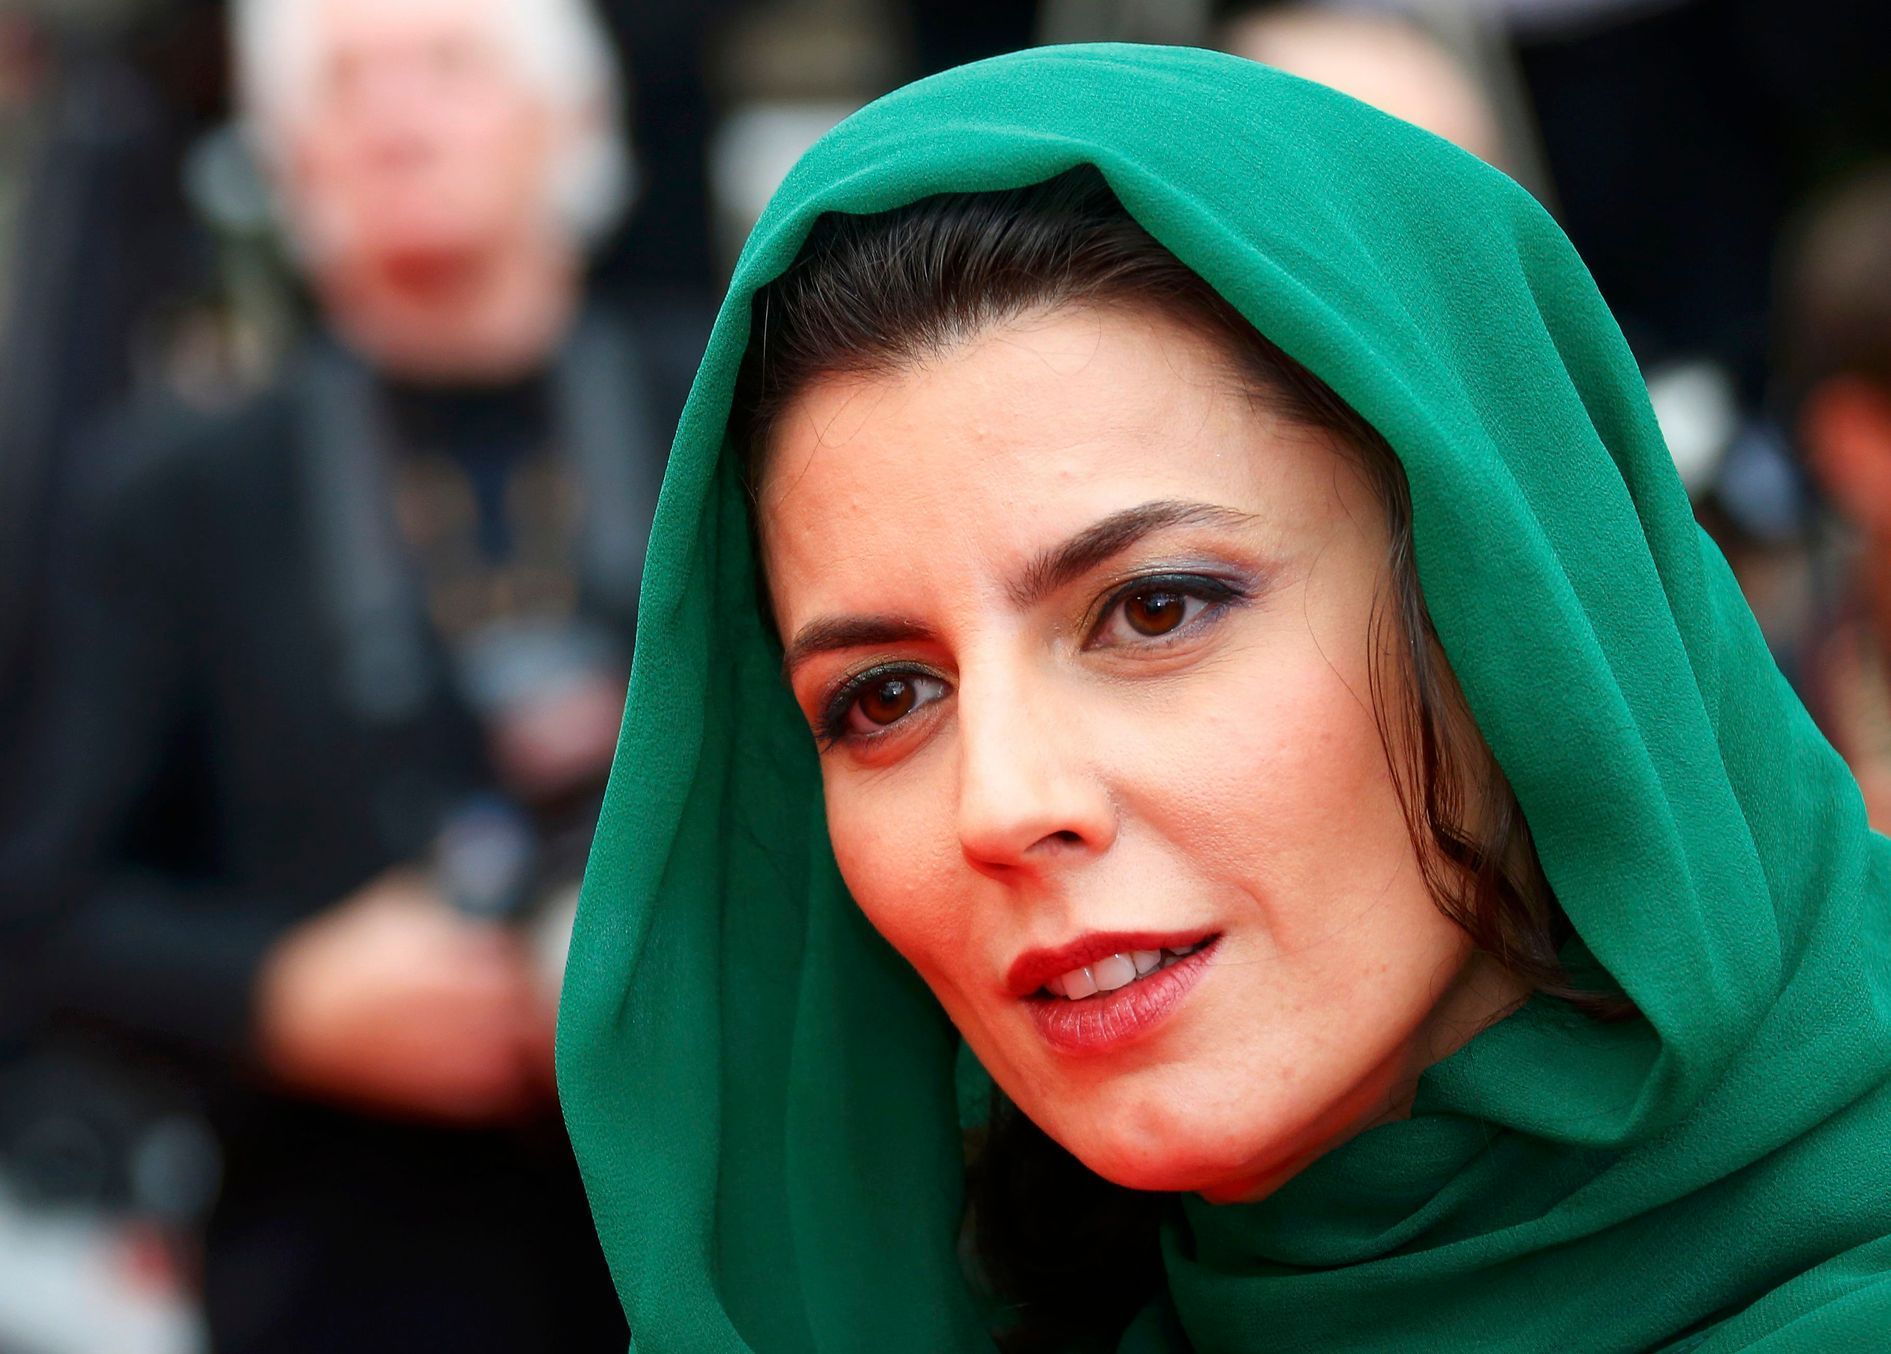 Jury member actress Leila Hatami poses on the red carpet as she arrives for the screening of the film &quot;Jimmy's Hall&quot; in competition at the 67th Cannes Film Festival in Cannes